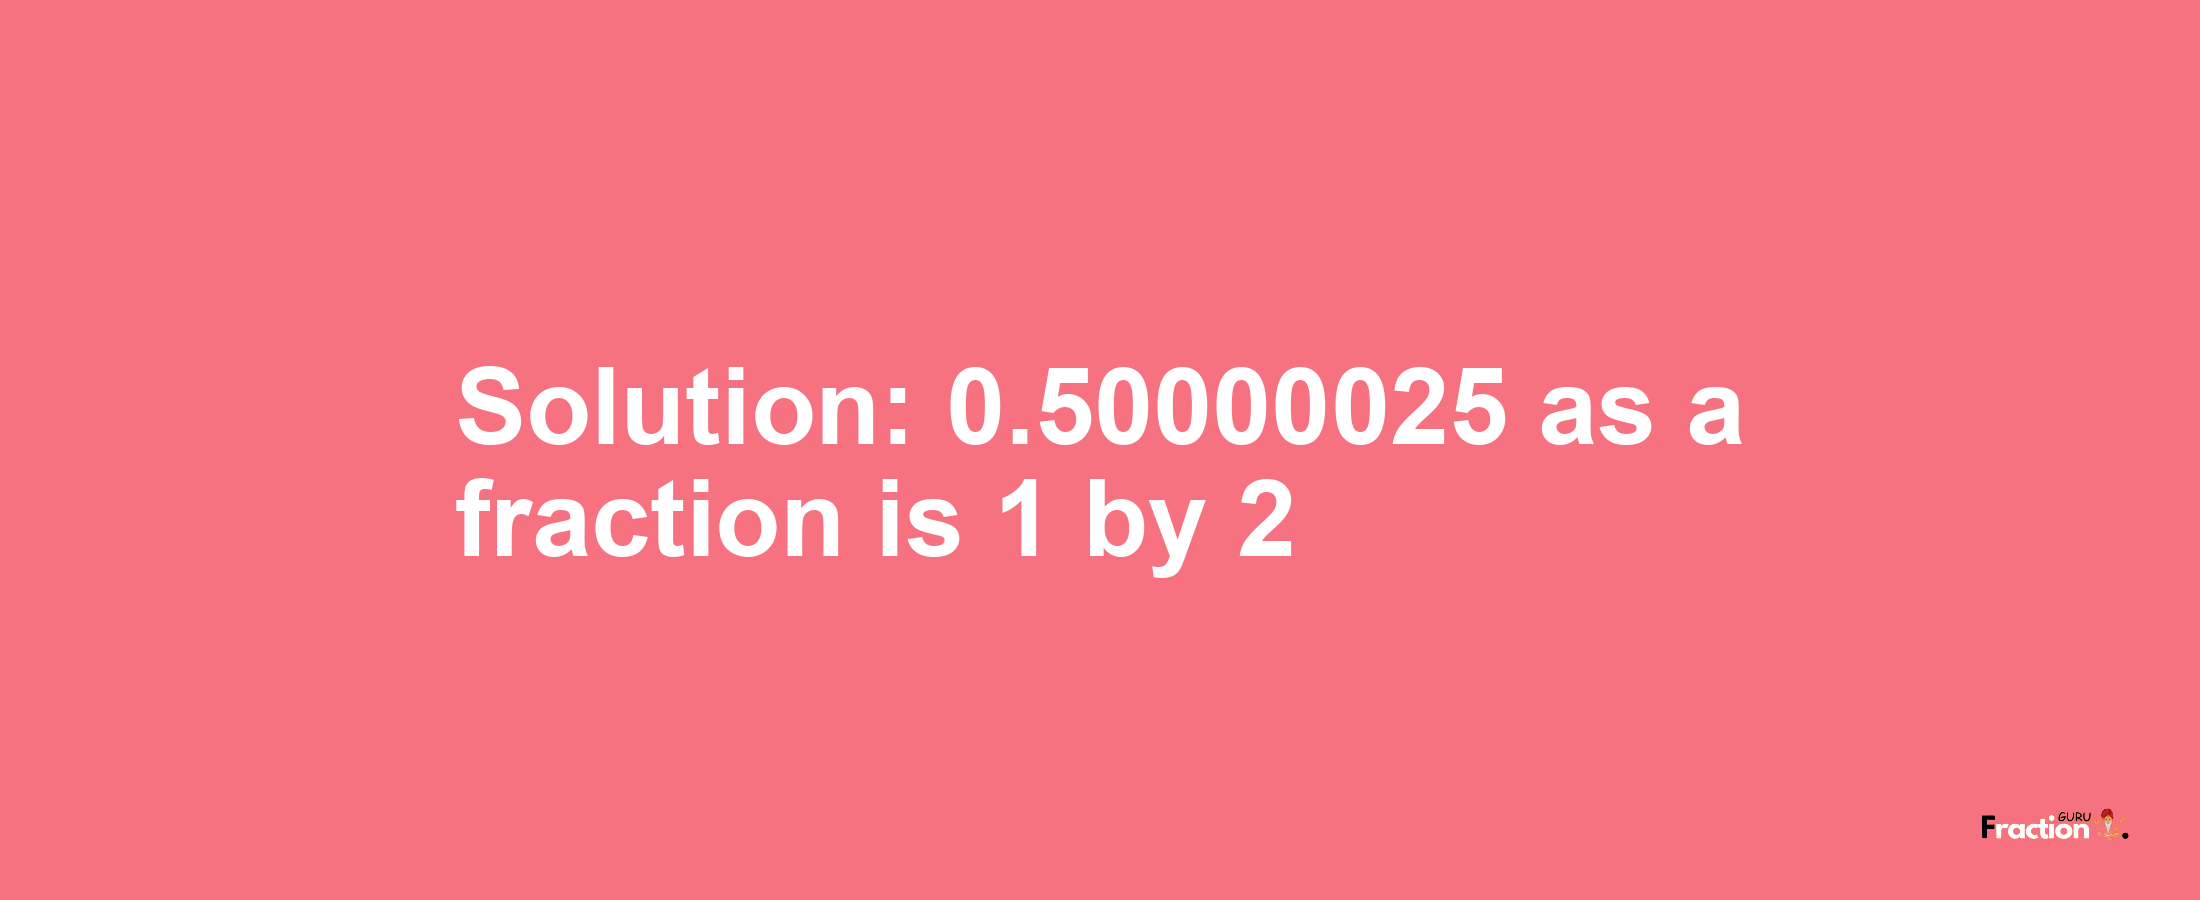 Solution:0.50000025 as a fraction is 1/2